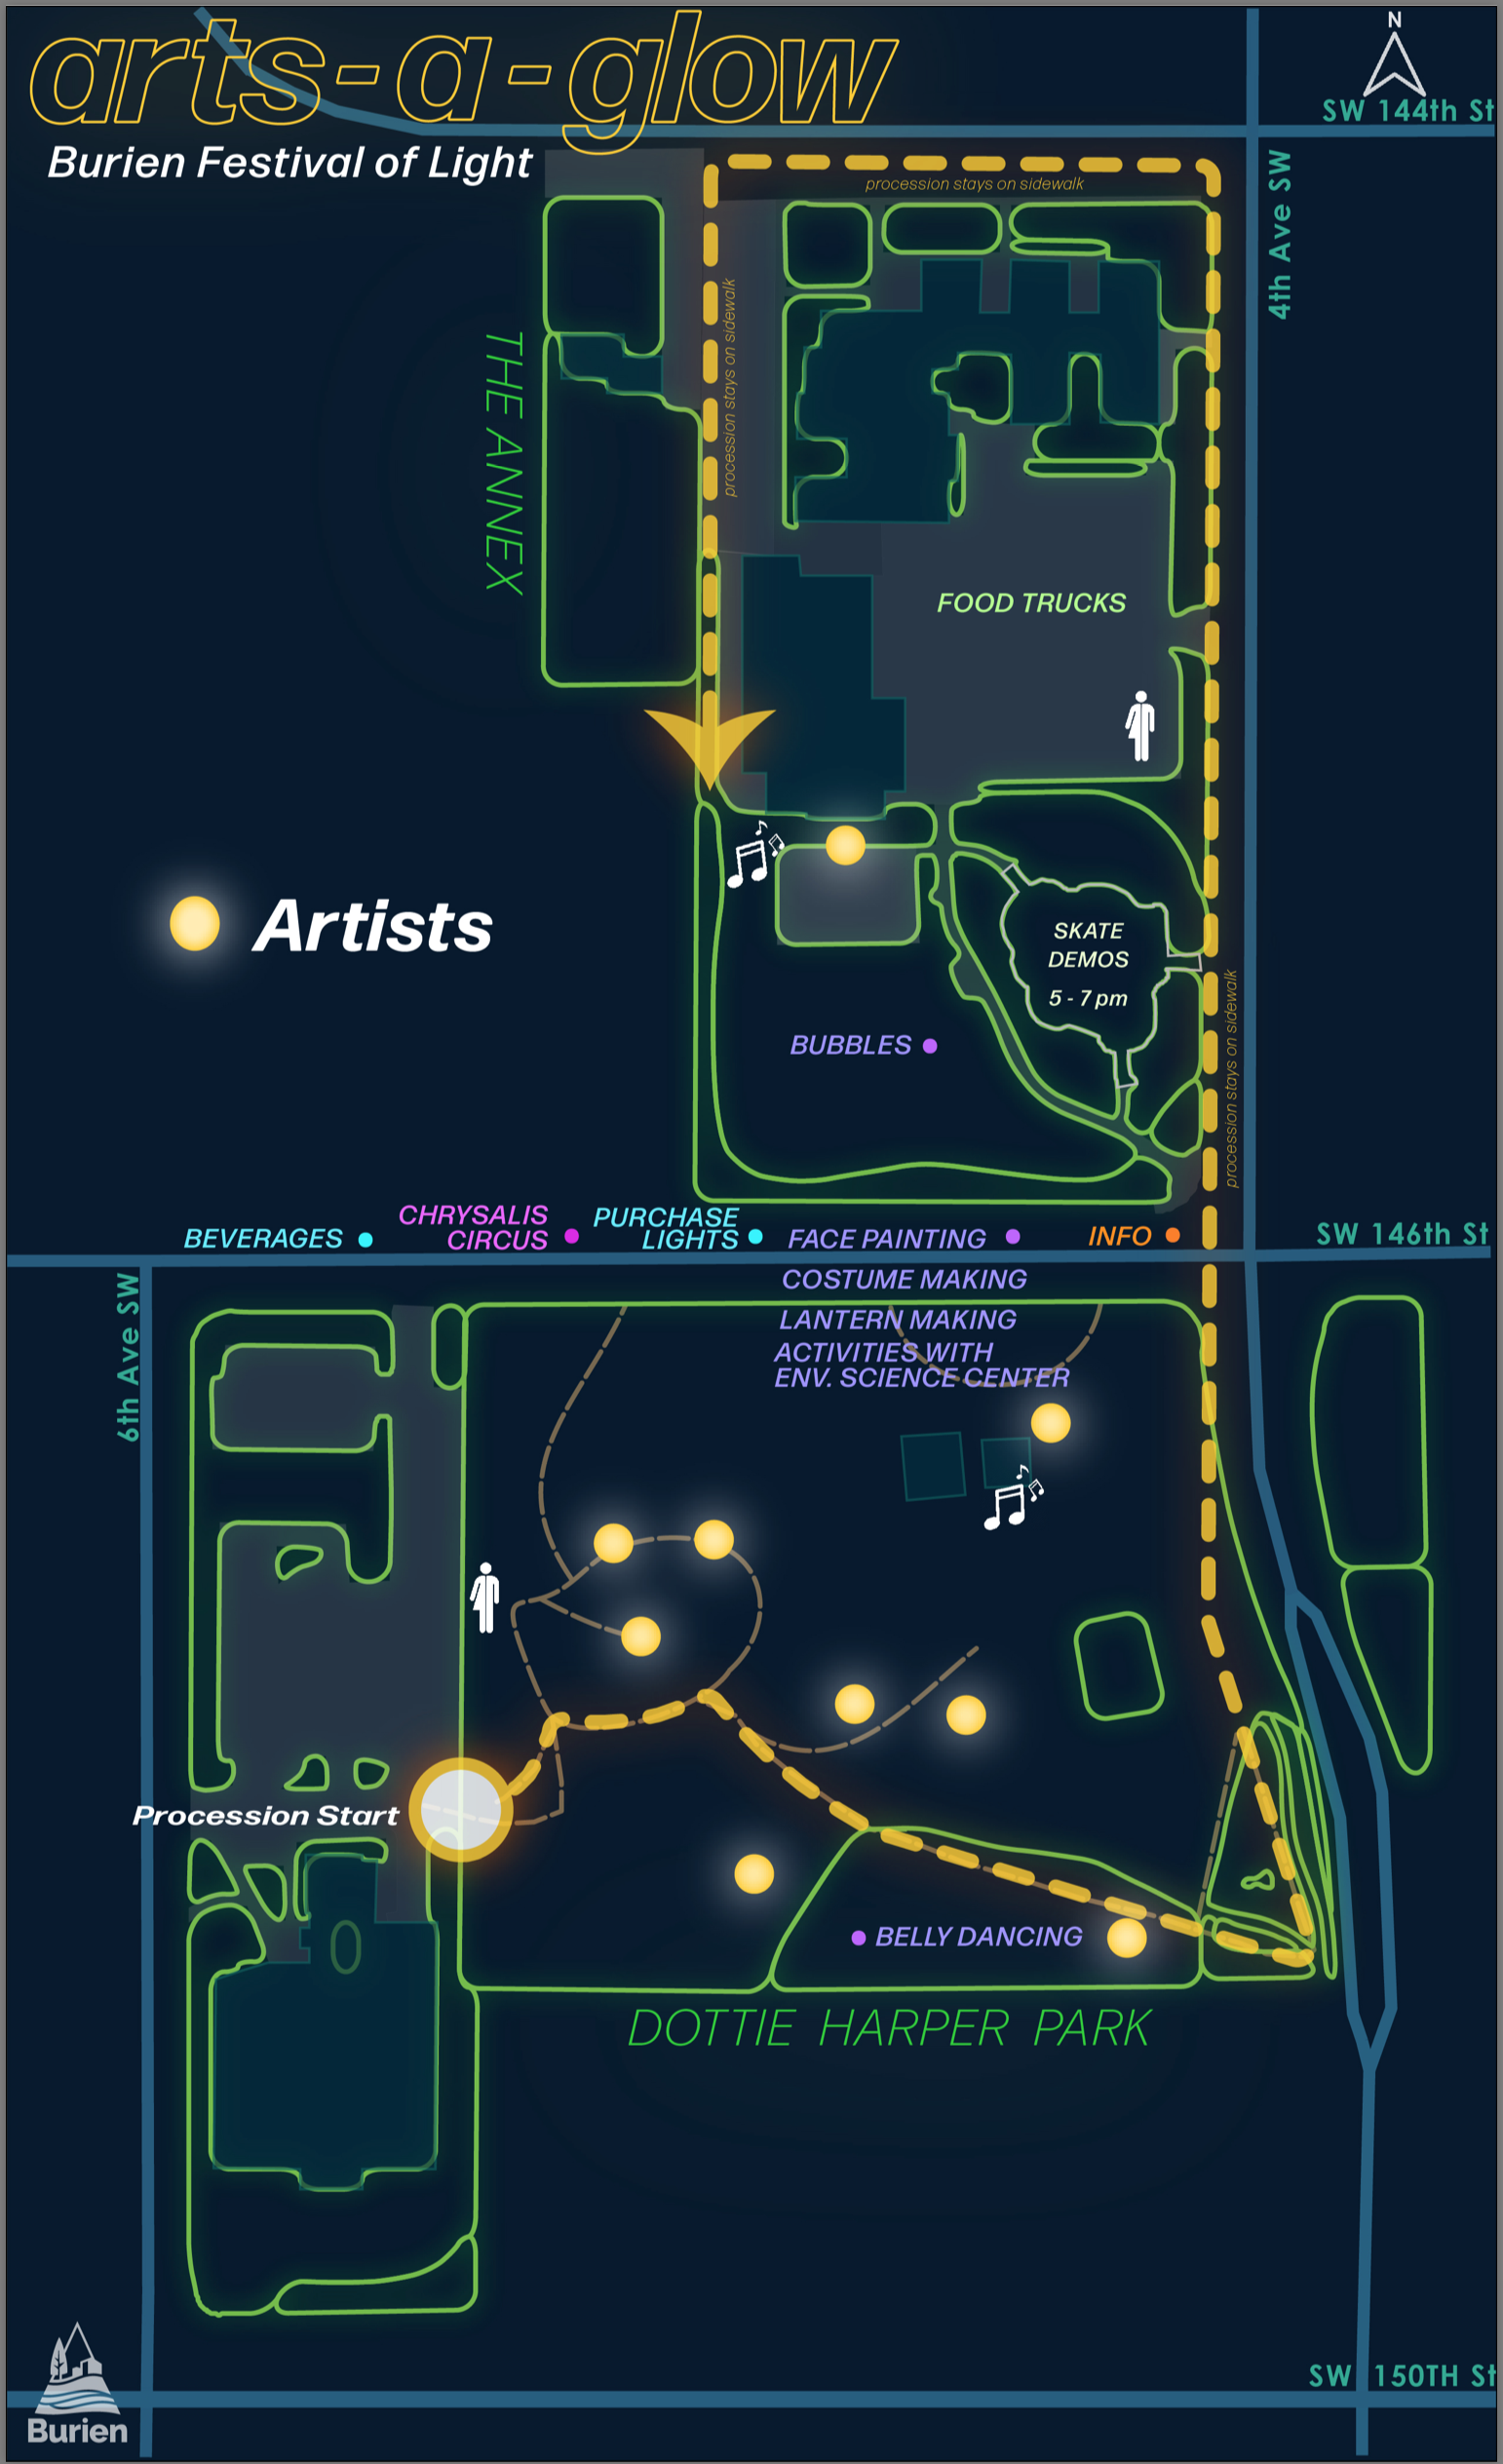 Arts a glow map and procession route